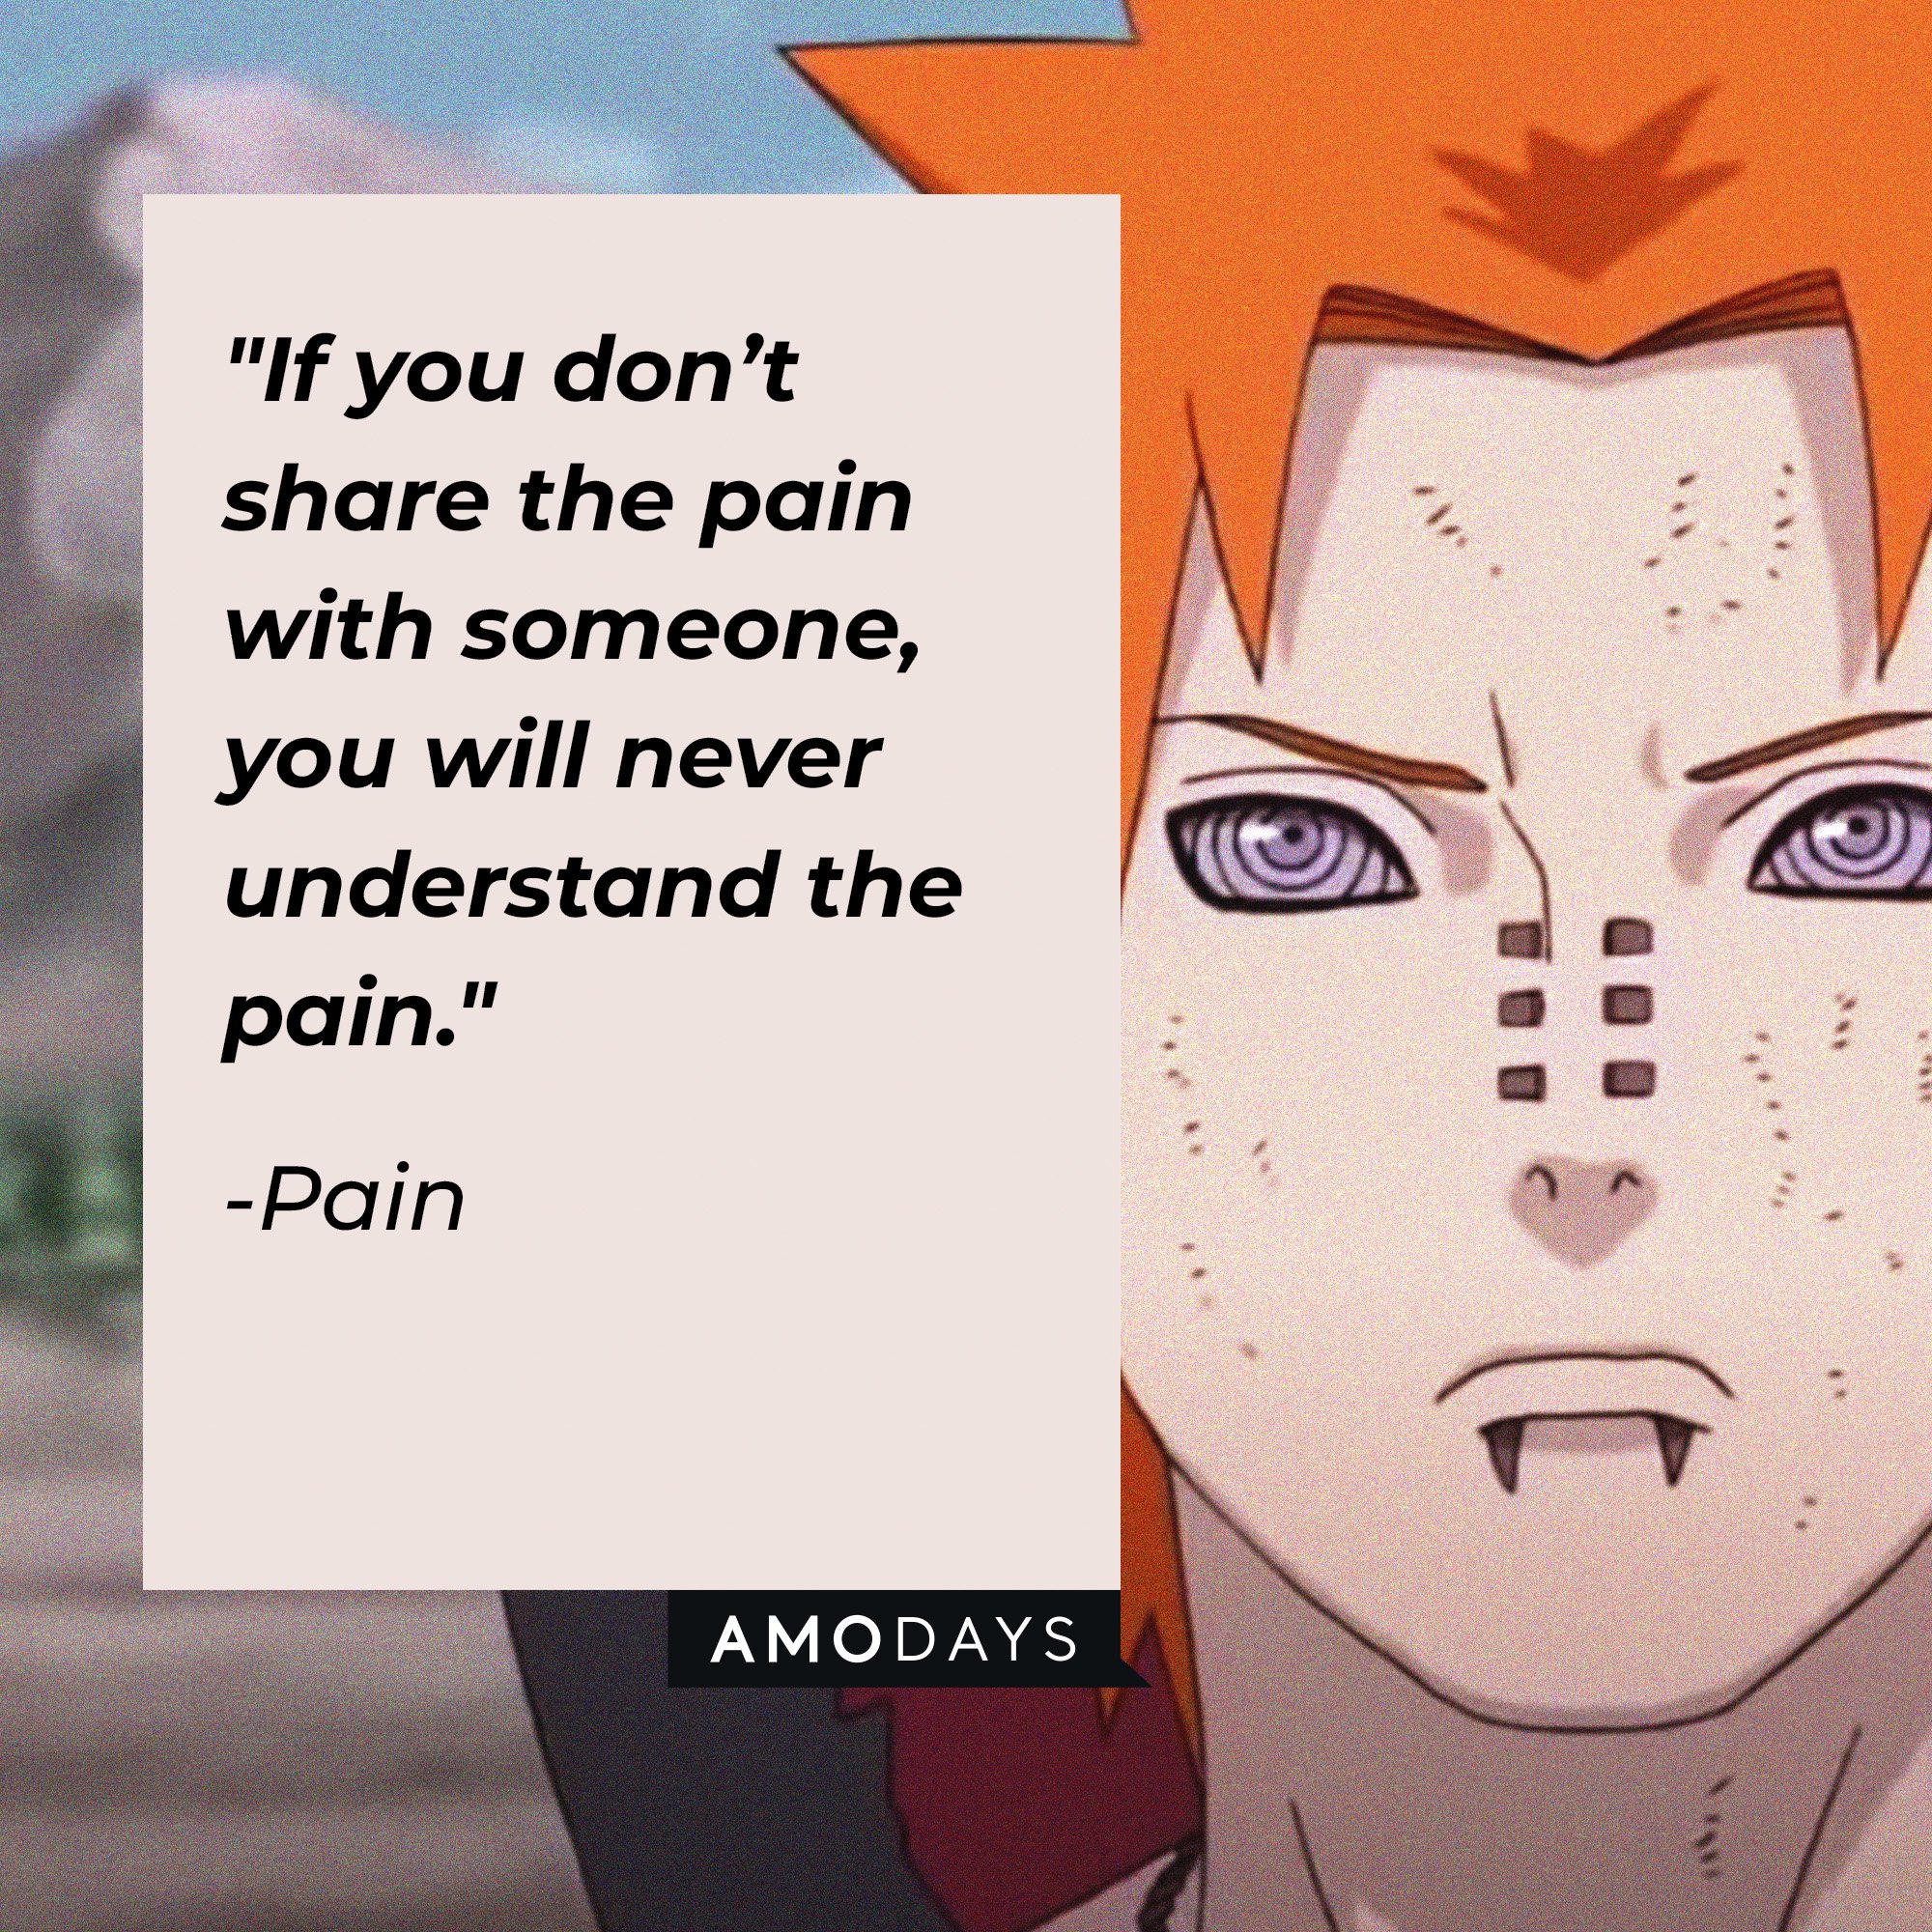 Pain's quote: "If you don’t share the pain with someone, you will never understand the pain." | Image: AmoDays